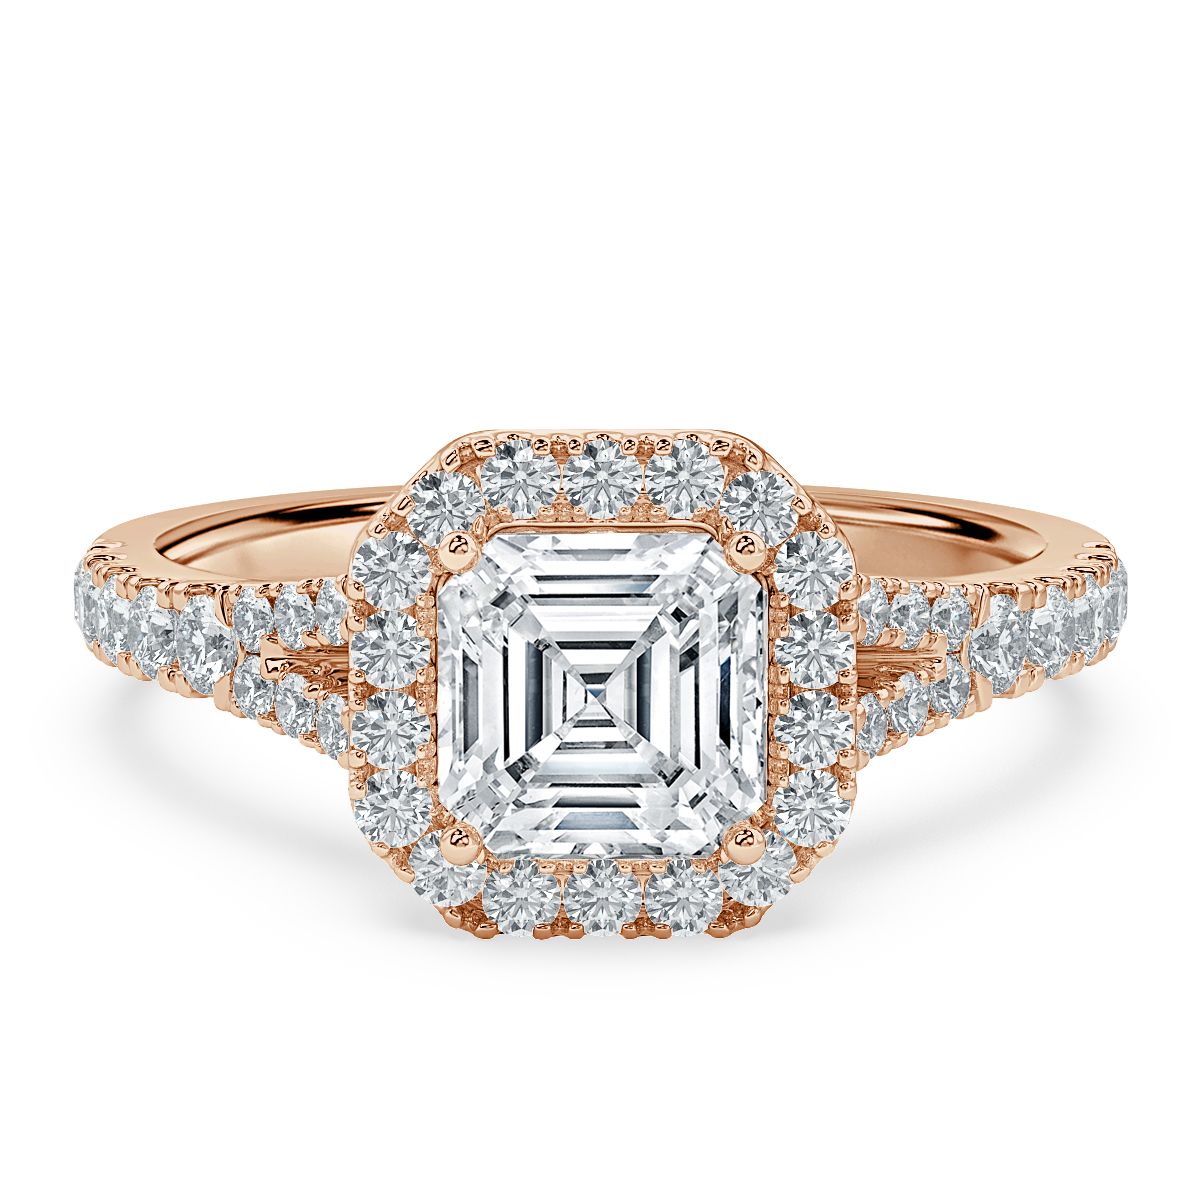 Diamond Solitaire Rings in UK | Solitaire Engagement Rings for Women